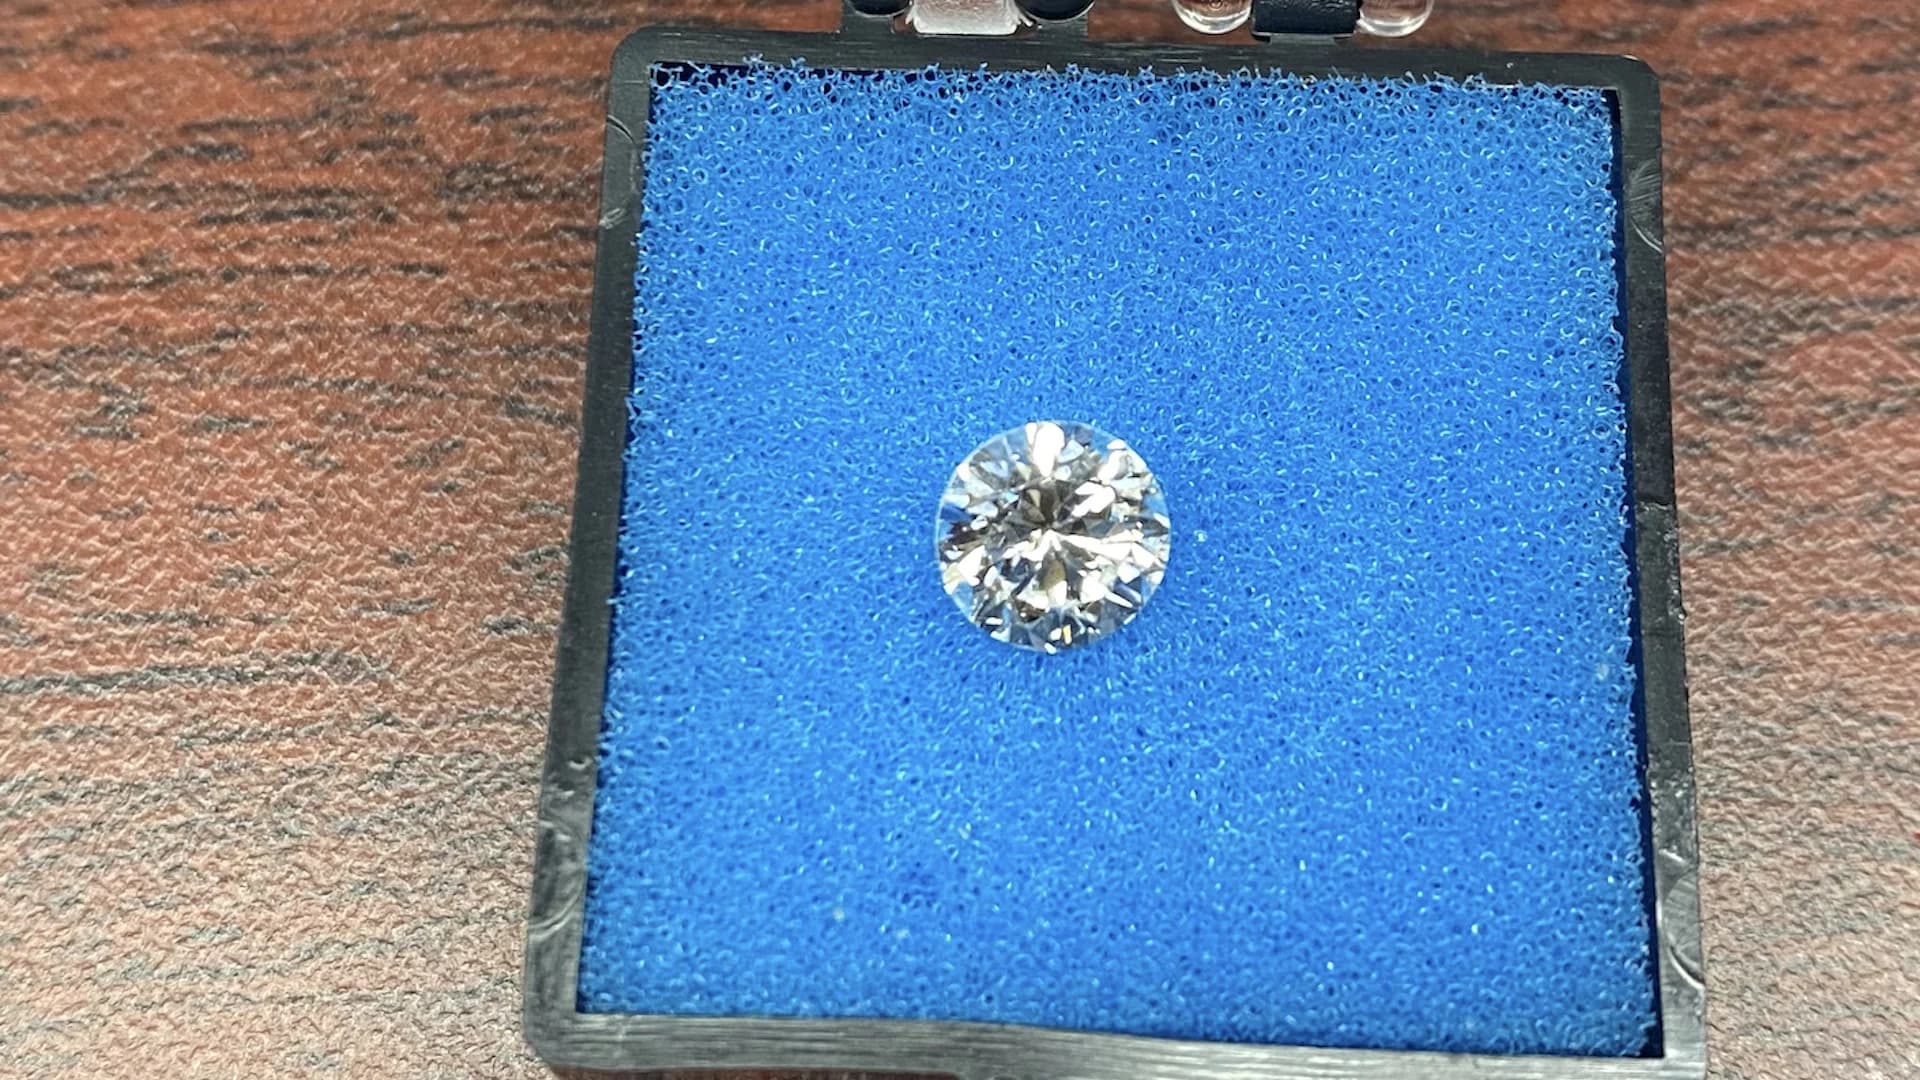 TSA officer spots 'sparkle' on ground, finds missing diamond from engagement ring at JFK